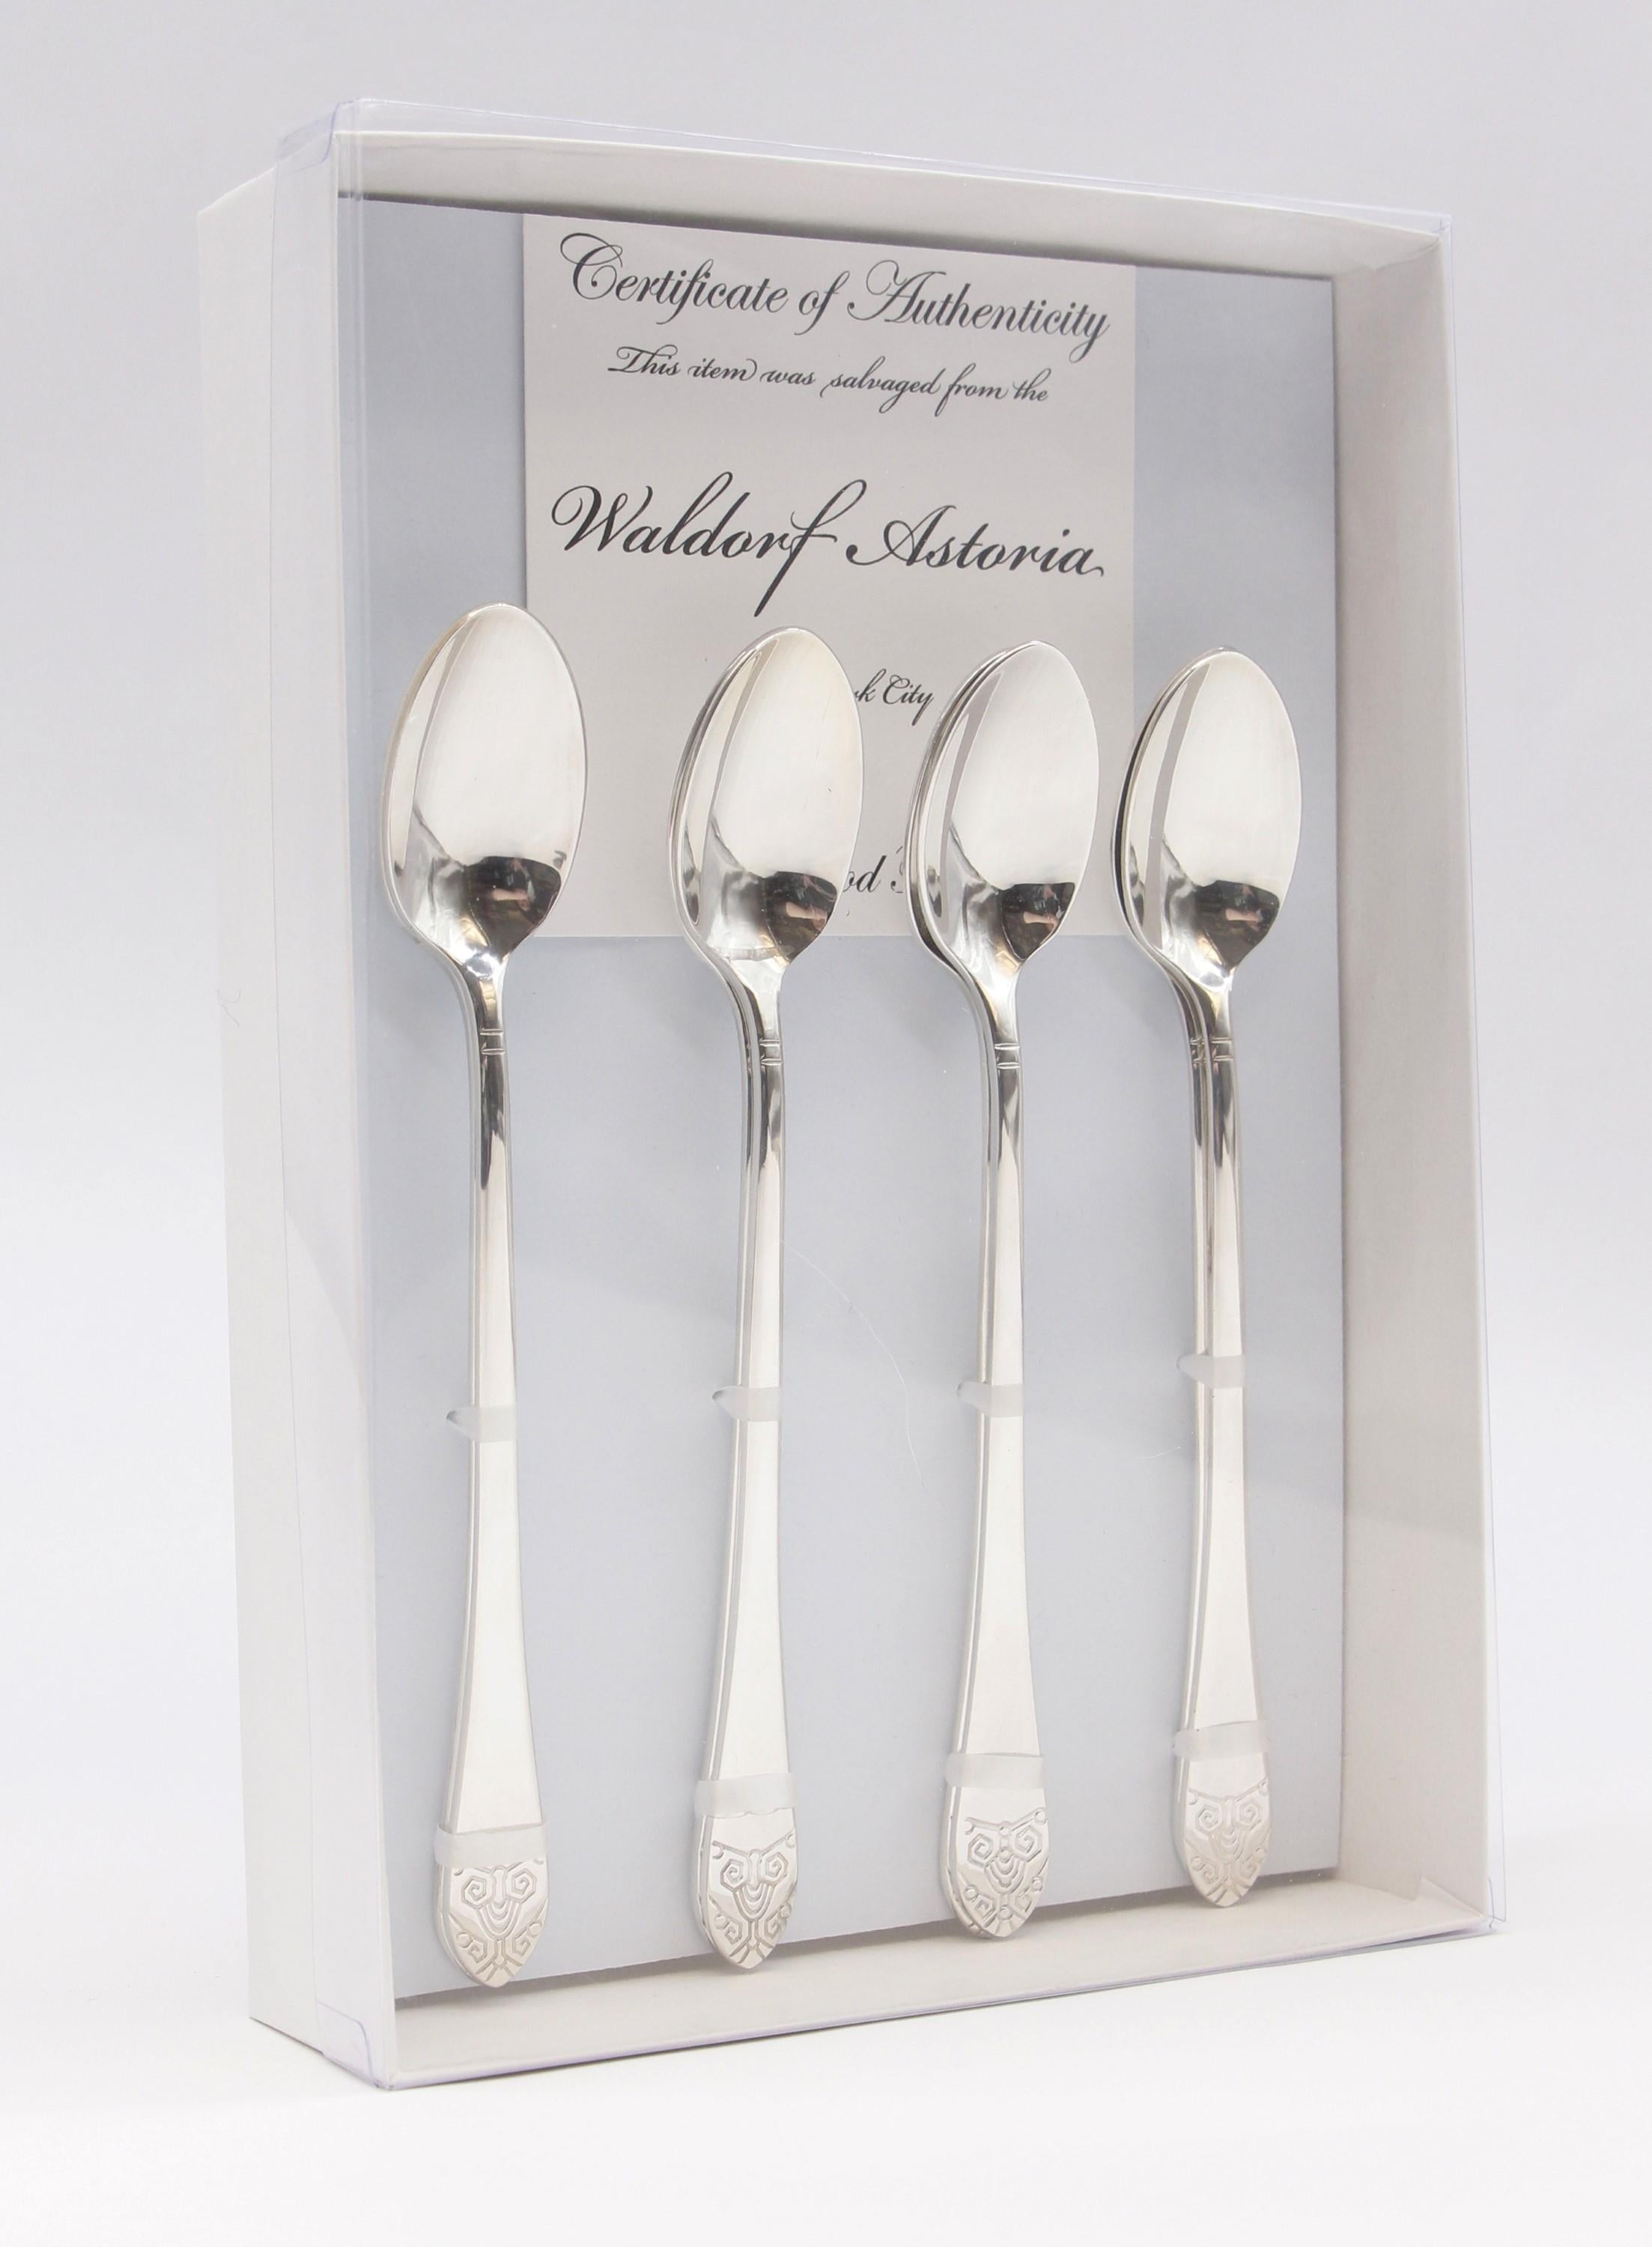 New, never used 8 piece silver plated steel Art Deco style ice teaspoon flatware set featuring the famous Waldorf Astoria Hotel logo. Made by Oneida. These pieces were back stock in the Waldorf Astoria Hotel on Park Ave in New York City. All pieces